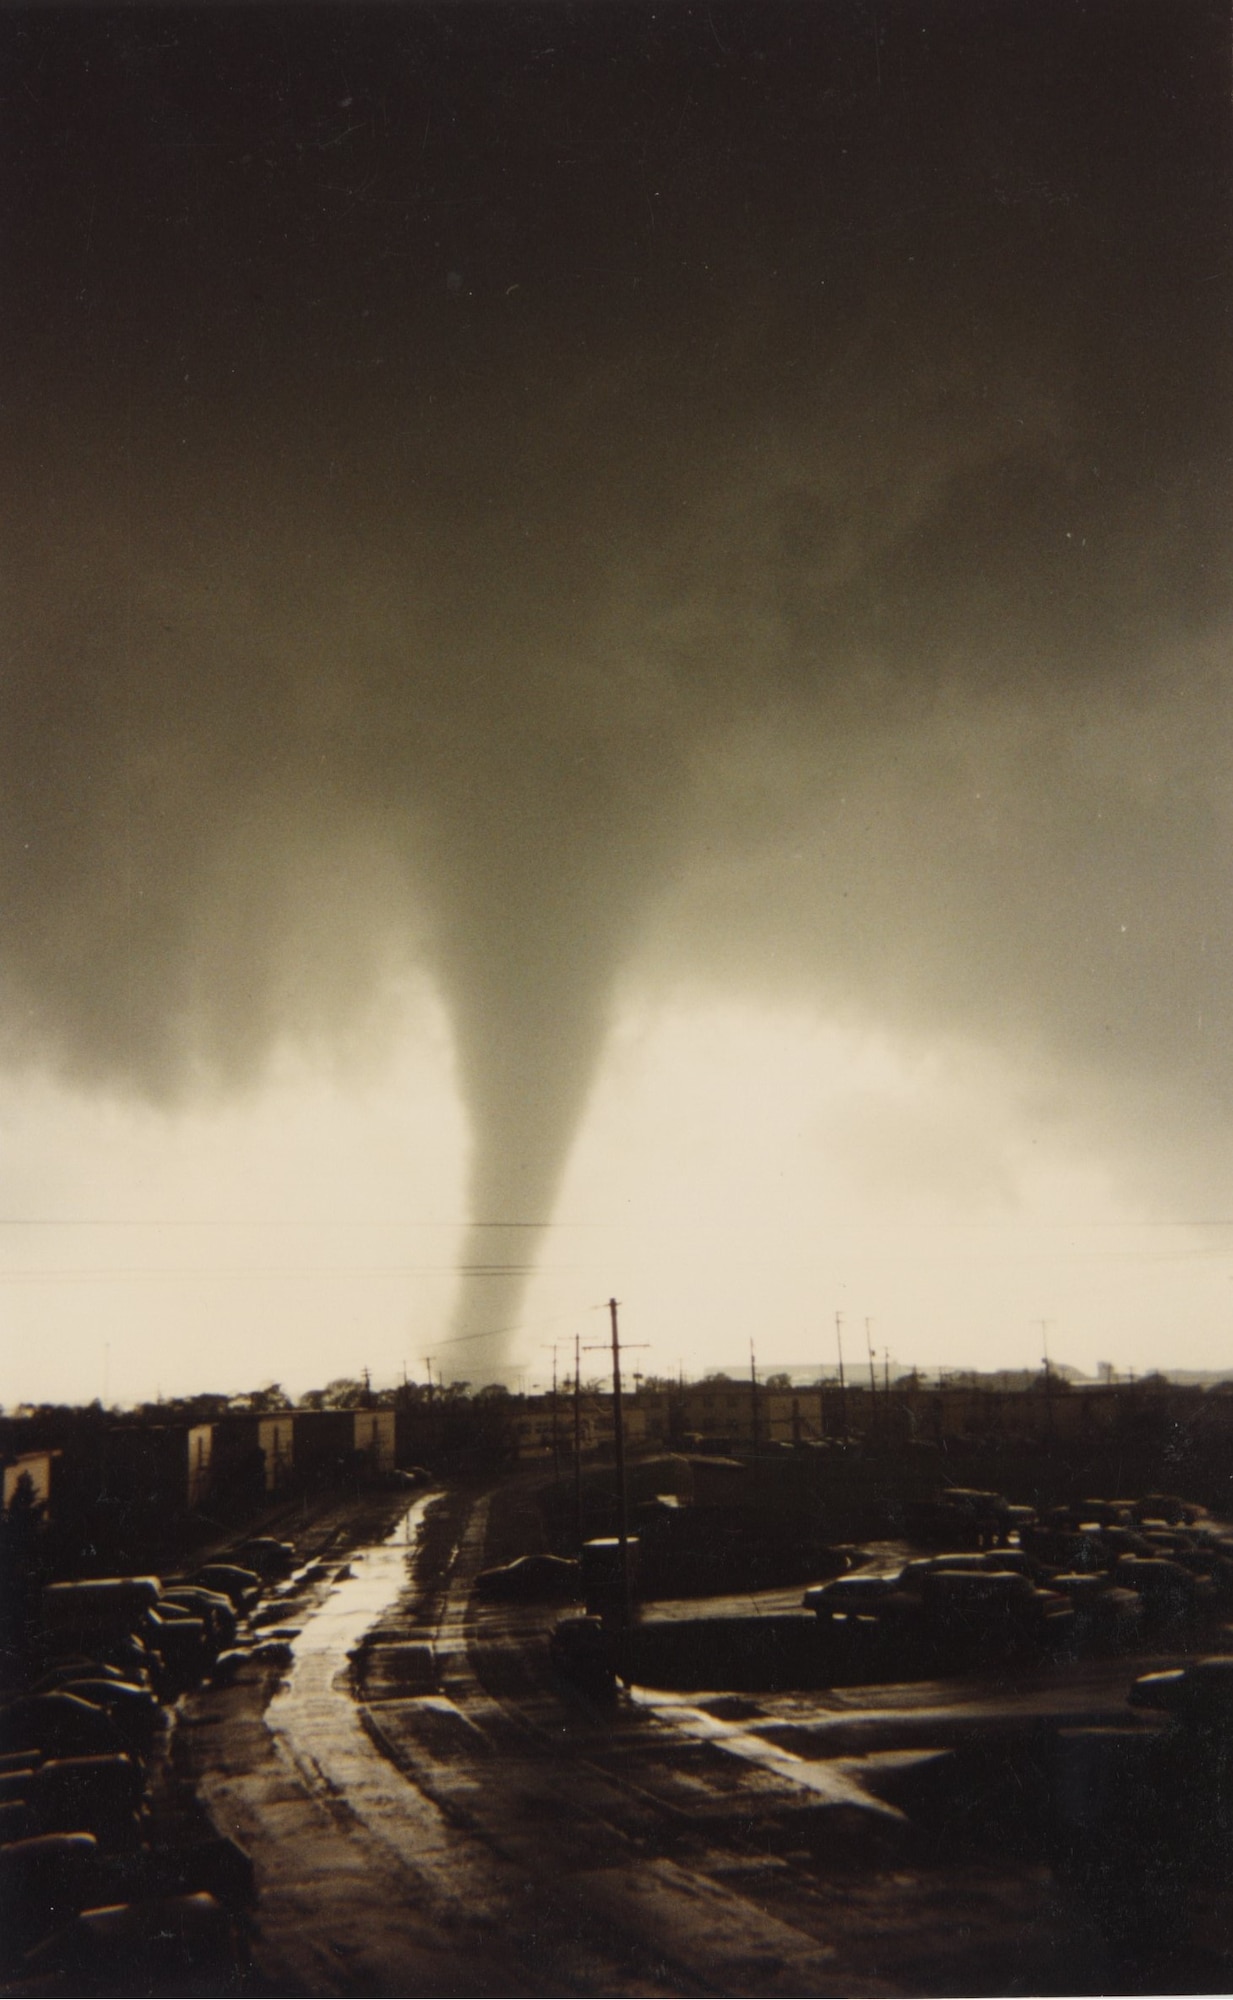 A tornado strikes military housing. April 16, 1991, at McConnell Air Force Base, Kansas. Over 100 housing units and nine major facilities were destroyed and damaged by the tornado during the most severe storm season ever recorded in Kansas. (U.S. Air Force photo by Senior Airman Nilsa Garcia)